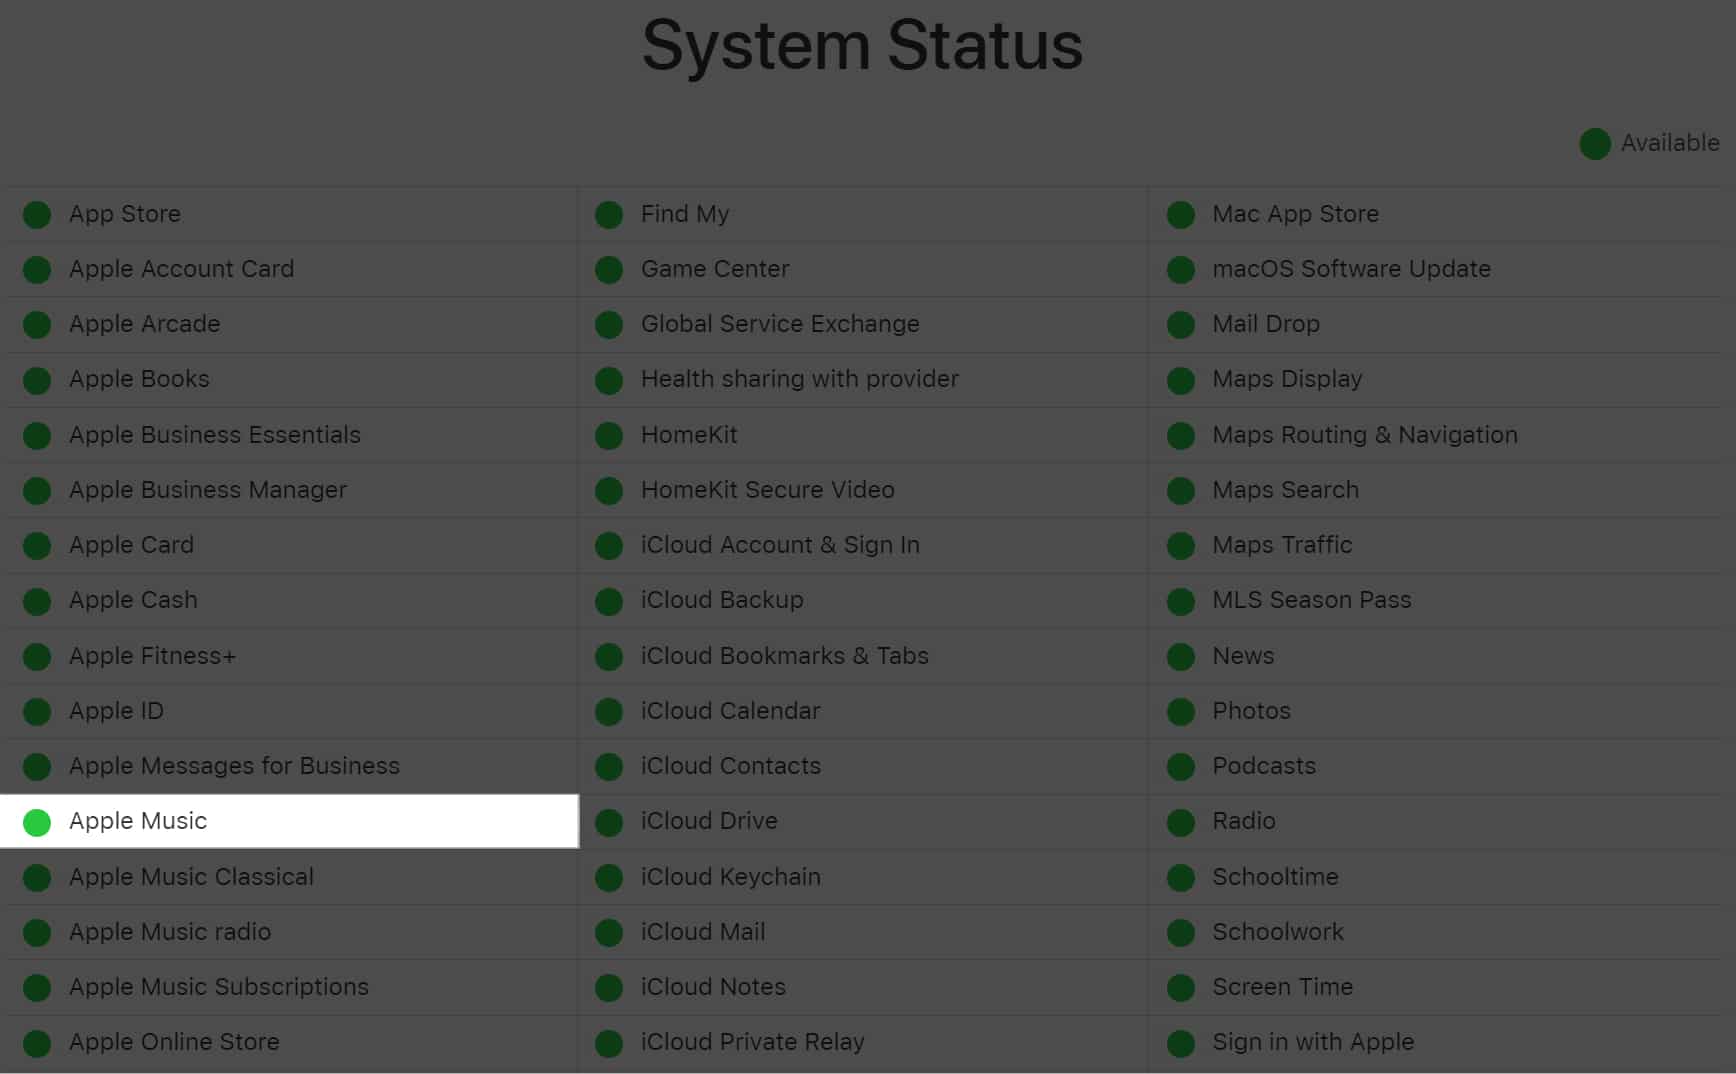 Check Apple's System Status Page